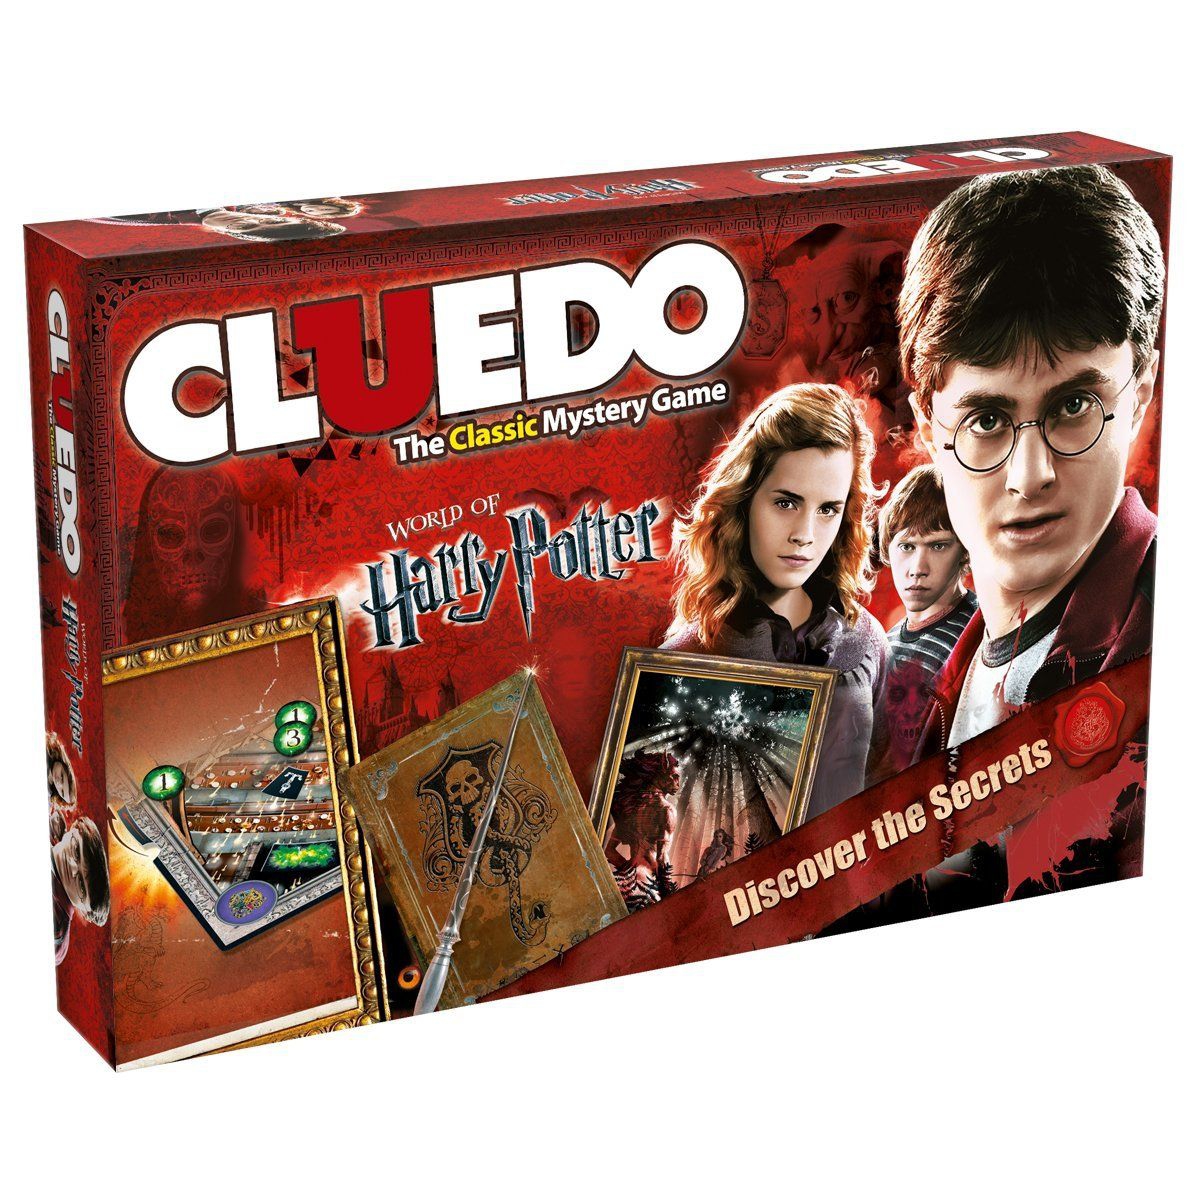 Cluedo 'Harry Potter' Board Game